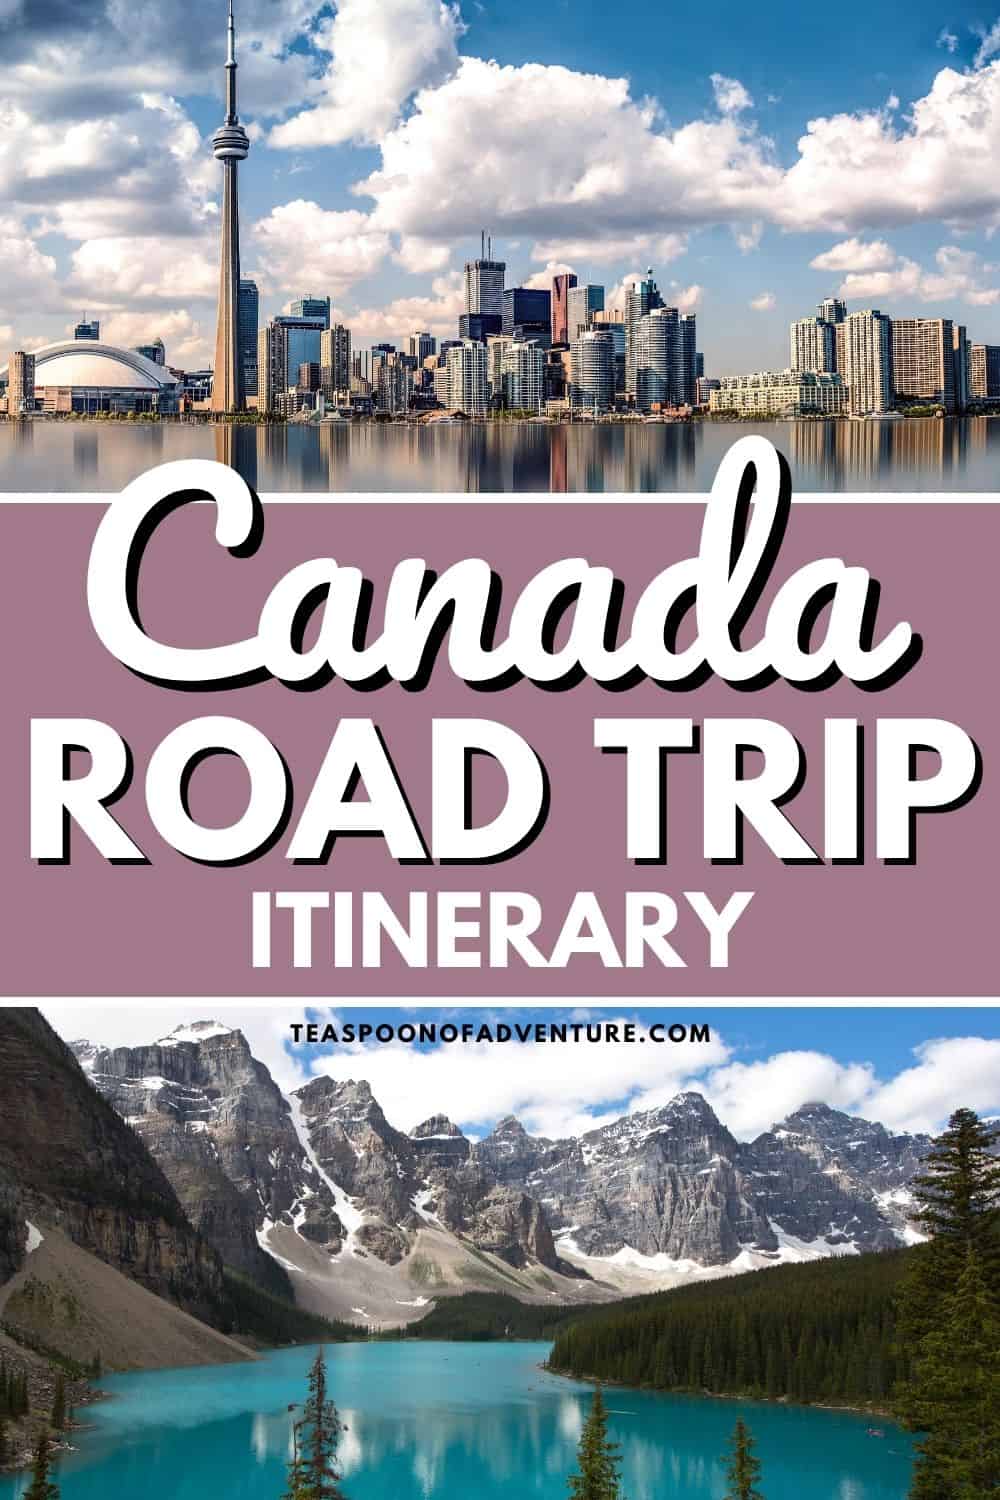 ULTIMATE CANADA ROAD TRIP: From Victoria to St. John's, discover the ultimate cross Canada road trip itinerary with 34+ stops and planning advice! #canada #travel #roadtrip #banff #vancouver #toronto #niagarafalls